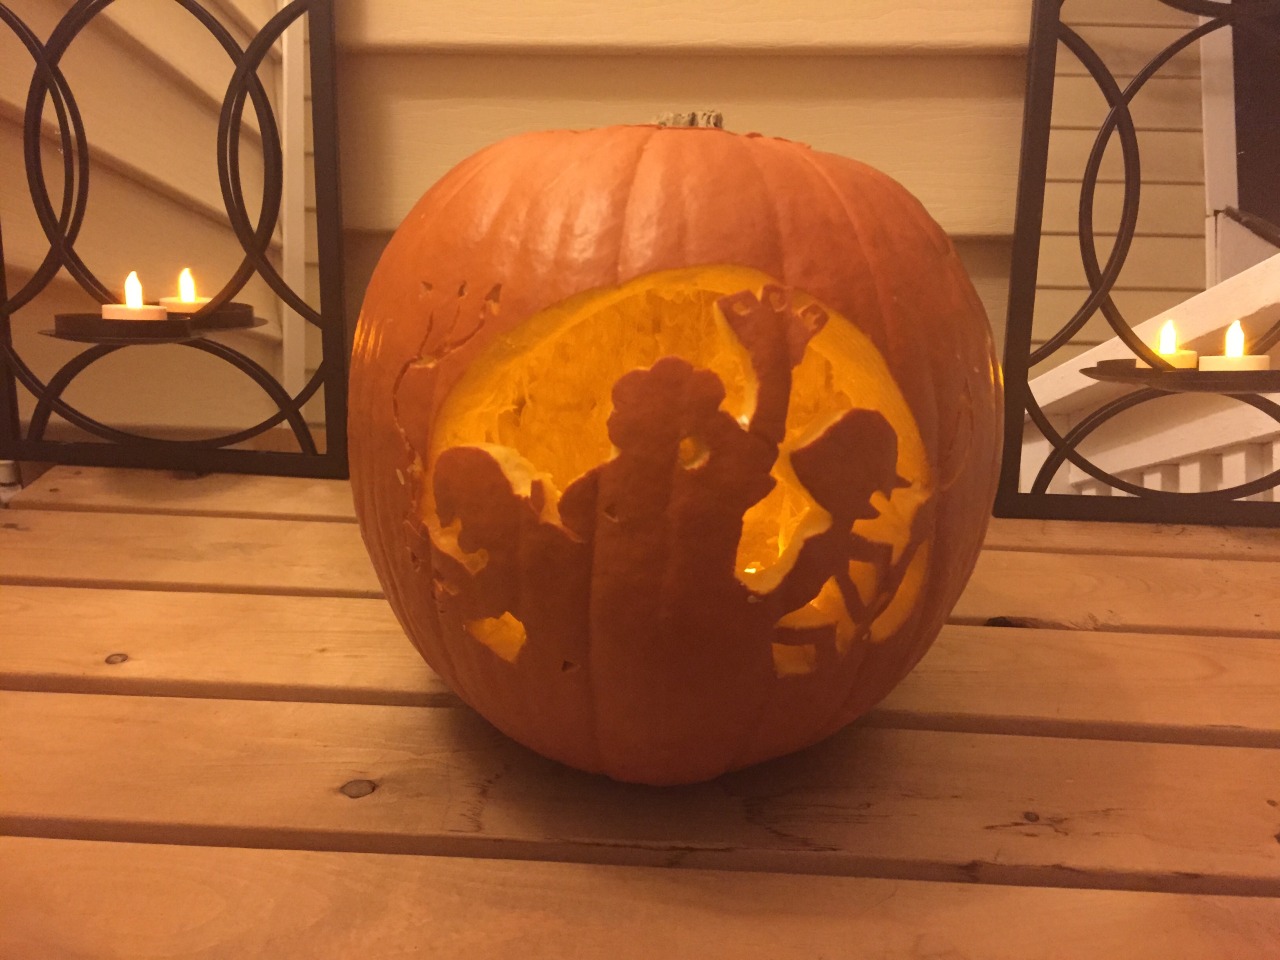 I really wanted to carve the Secret Team promo last year into a pumpkin for halloween but I didn’t get the chance. This year, of course, I made sure it happened! B)